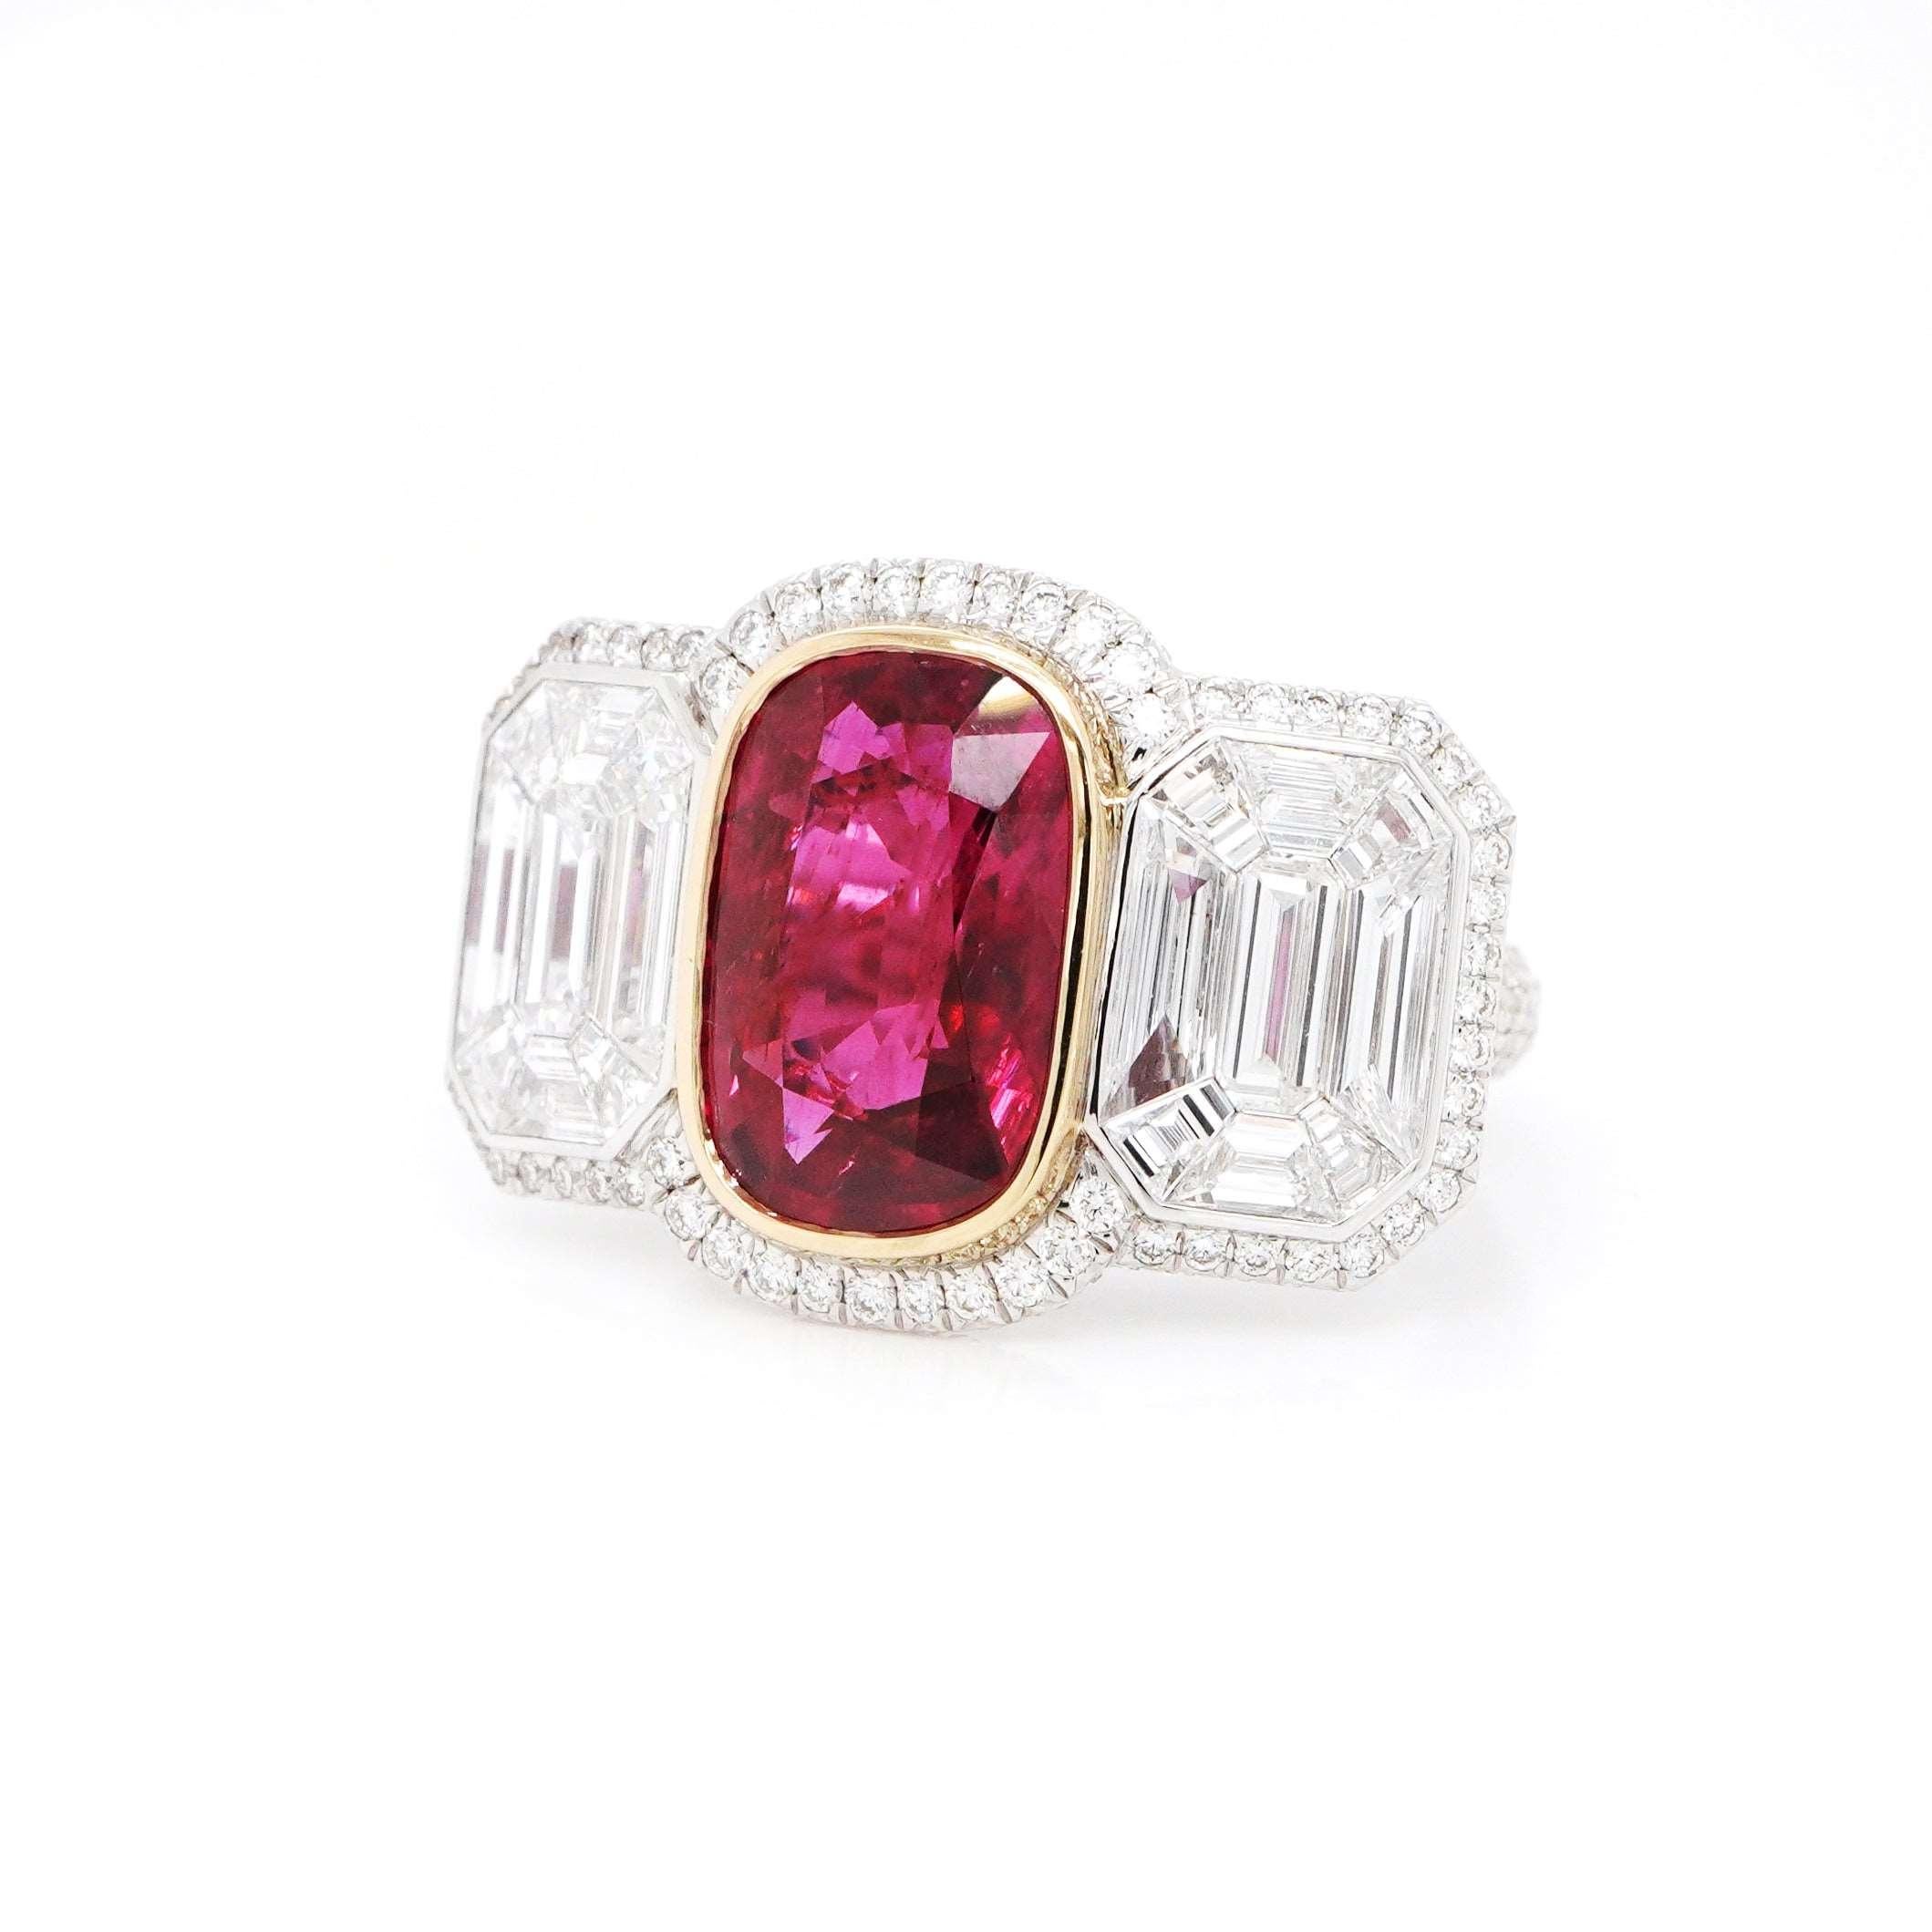 Modern BENJAMIN FINE JEWELRY 5.37 cts Siam Ruby with Pie Cut Diamond 18K Ring For Sale